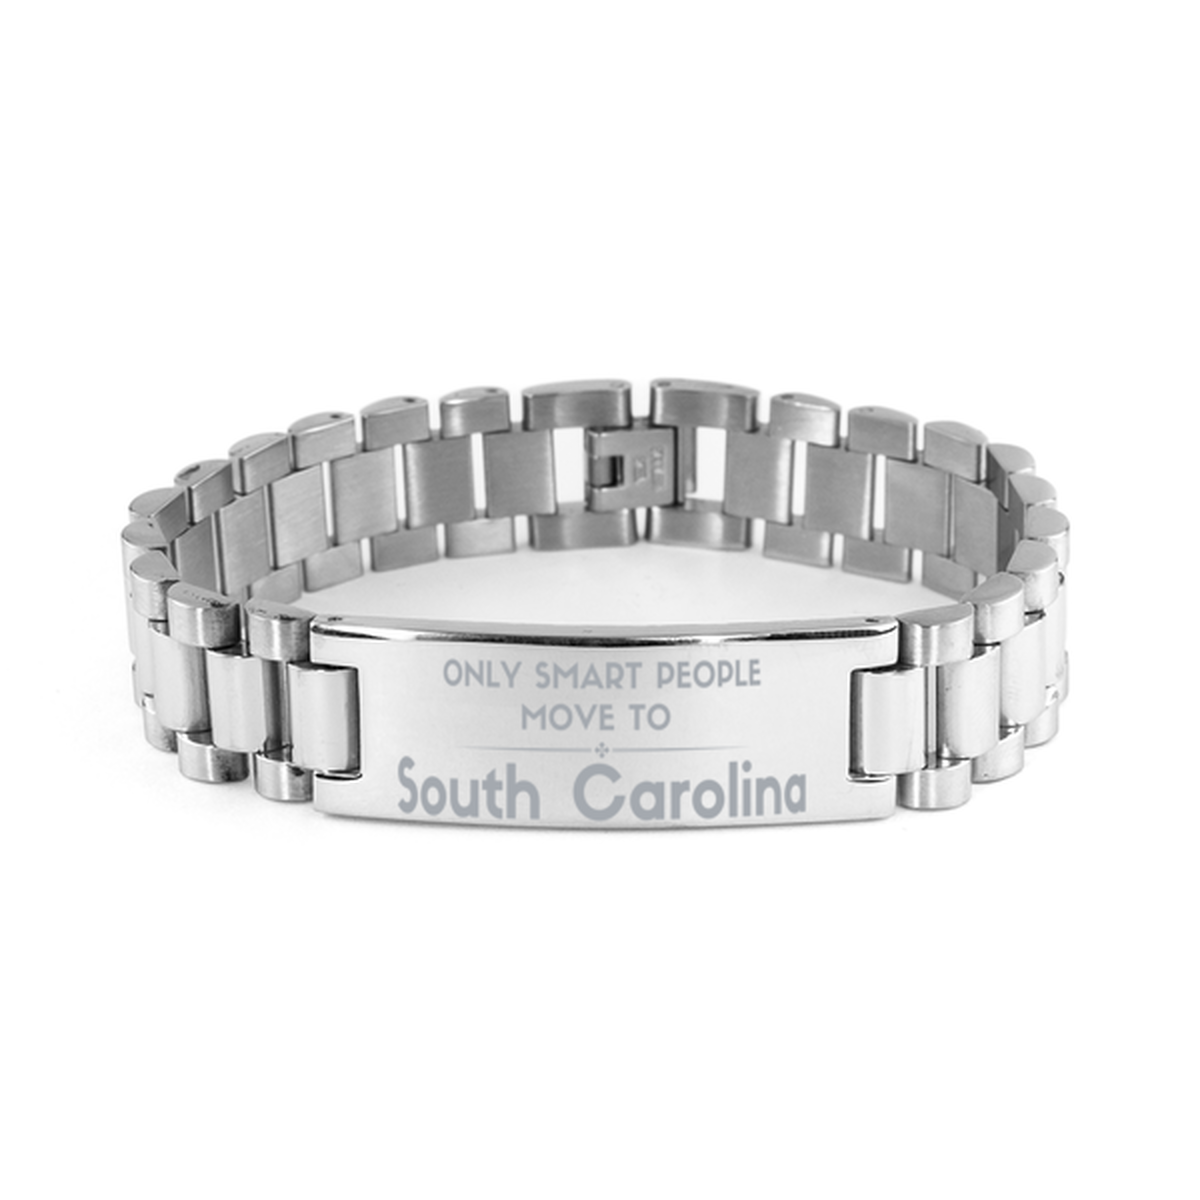 Only smart people move to South Carolina Ladder Stainless Steel Bracelet, Gag Gifts For South Carolina, Move to South Carolina Gifts for Friends Coworker Funny Saying Quote